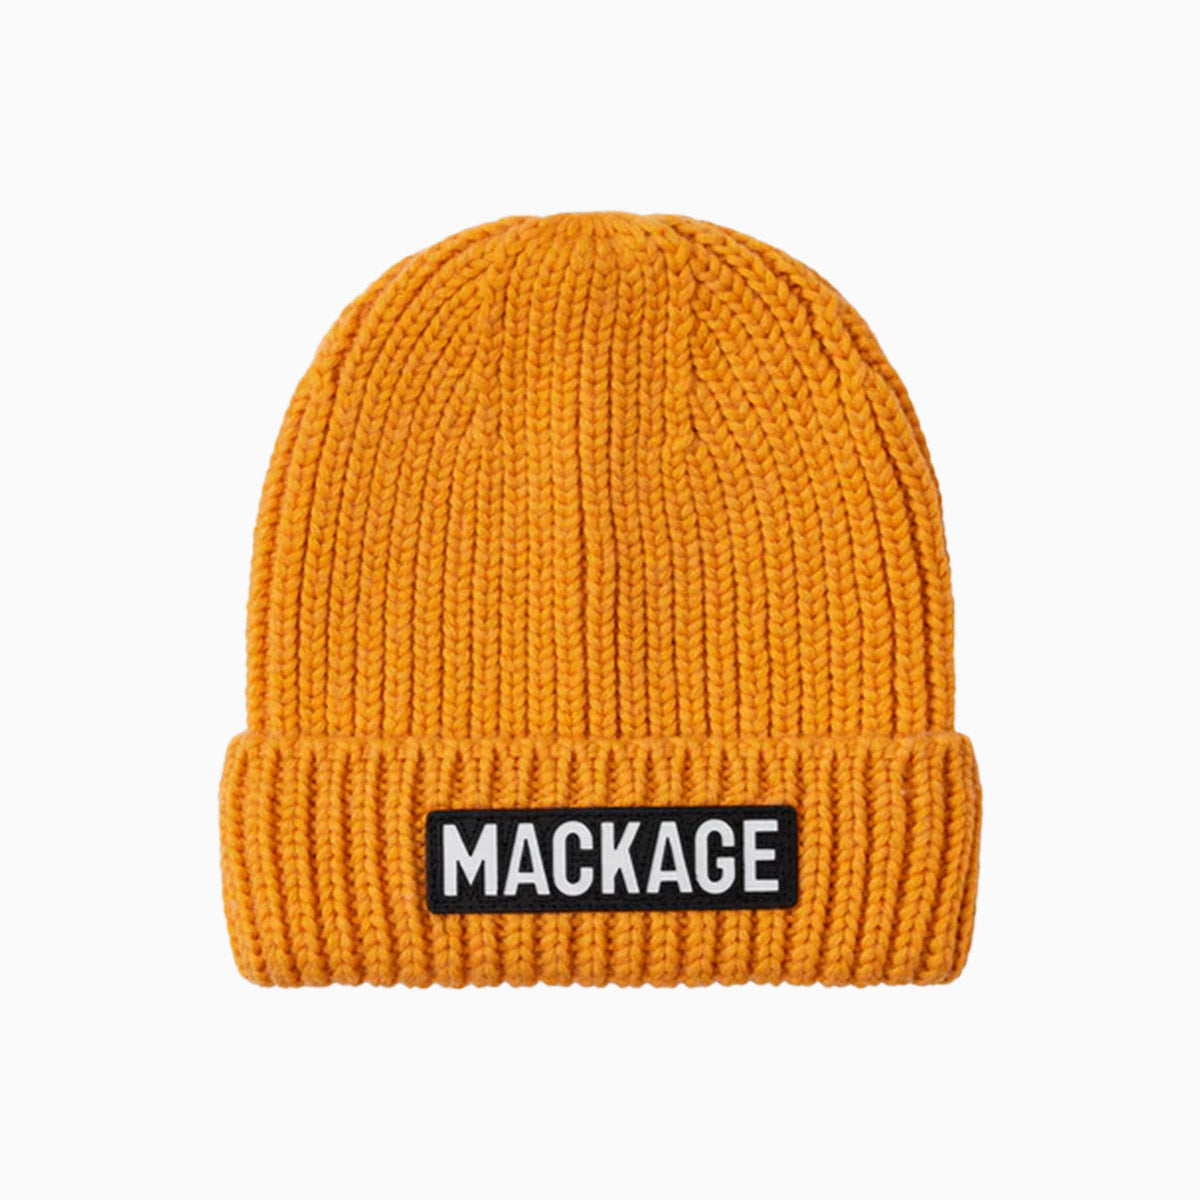 mackage-kids-jude-k-hand-knit-toque-with-ribbed-cuff-beanie-hat-jude-k-sunset